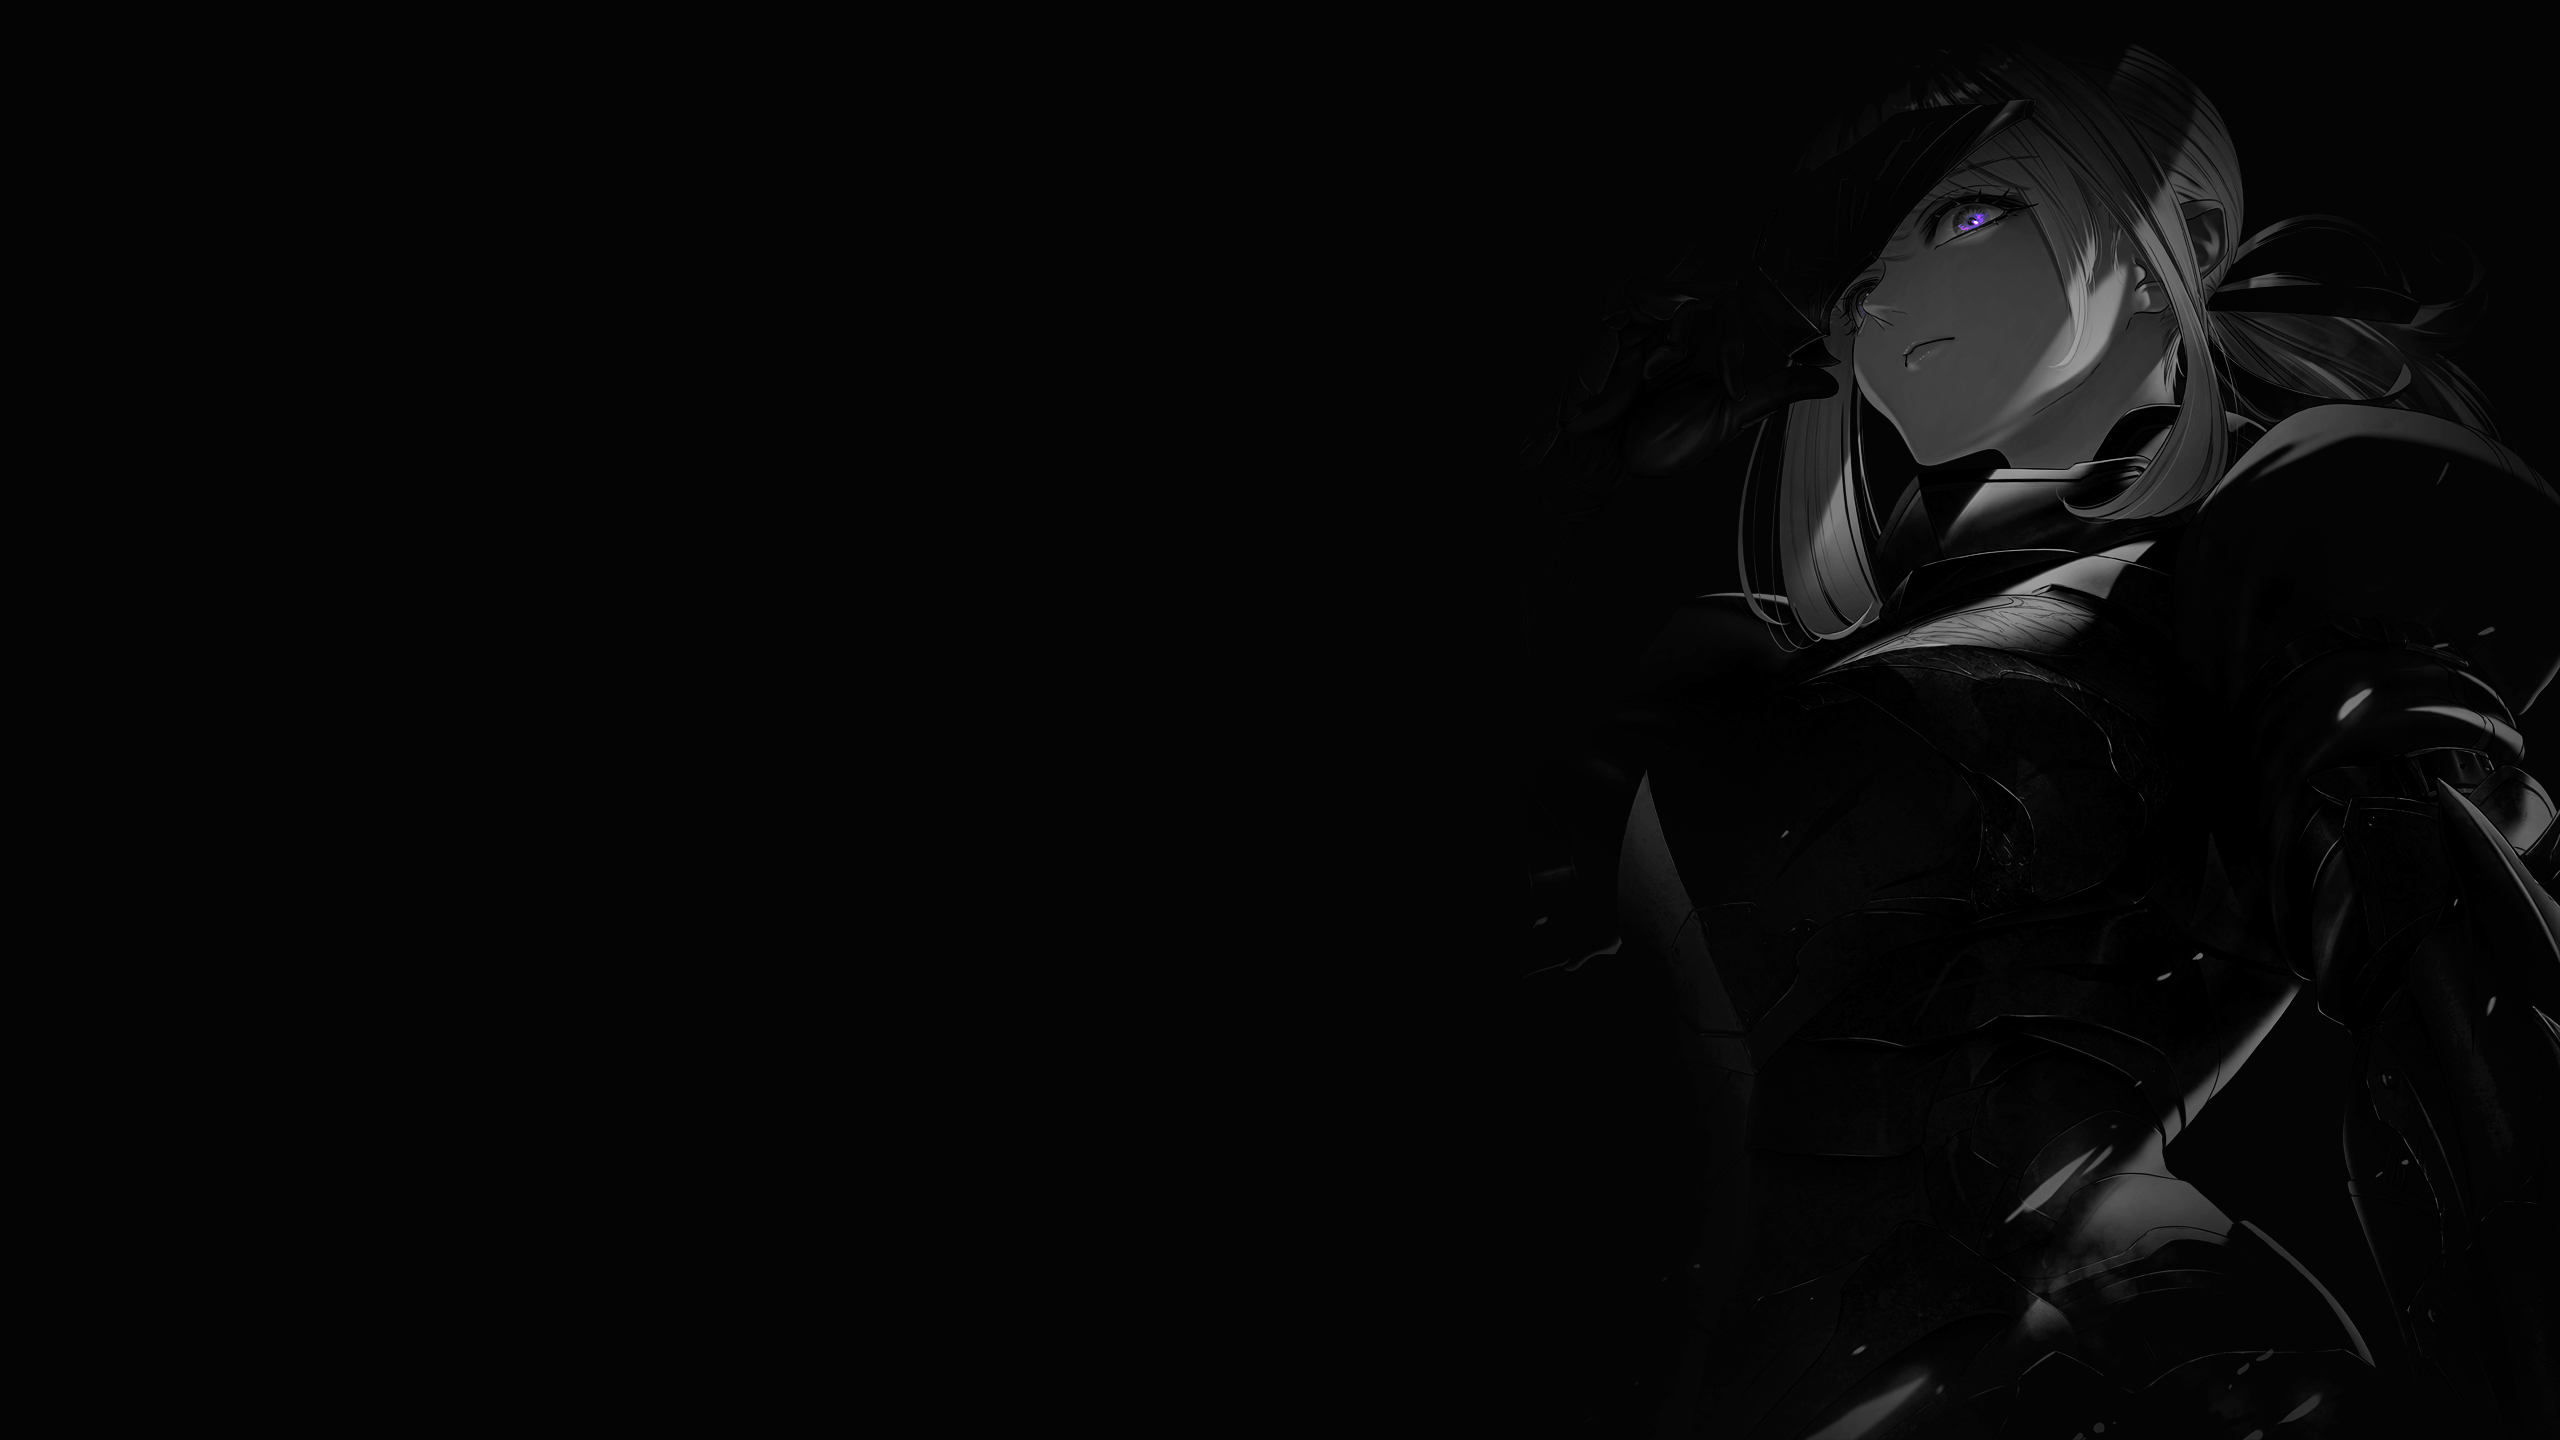 HD Black Aesthetic Anime Wallpapers - Wallpaper Cave